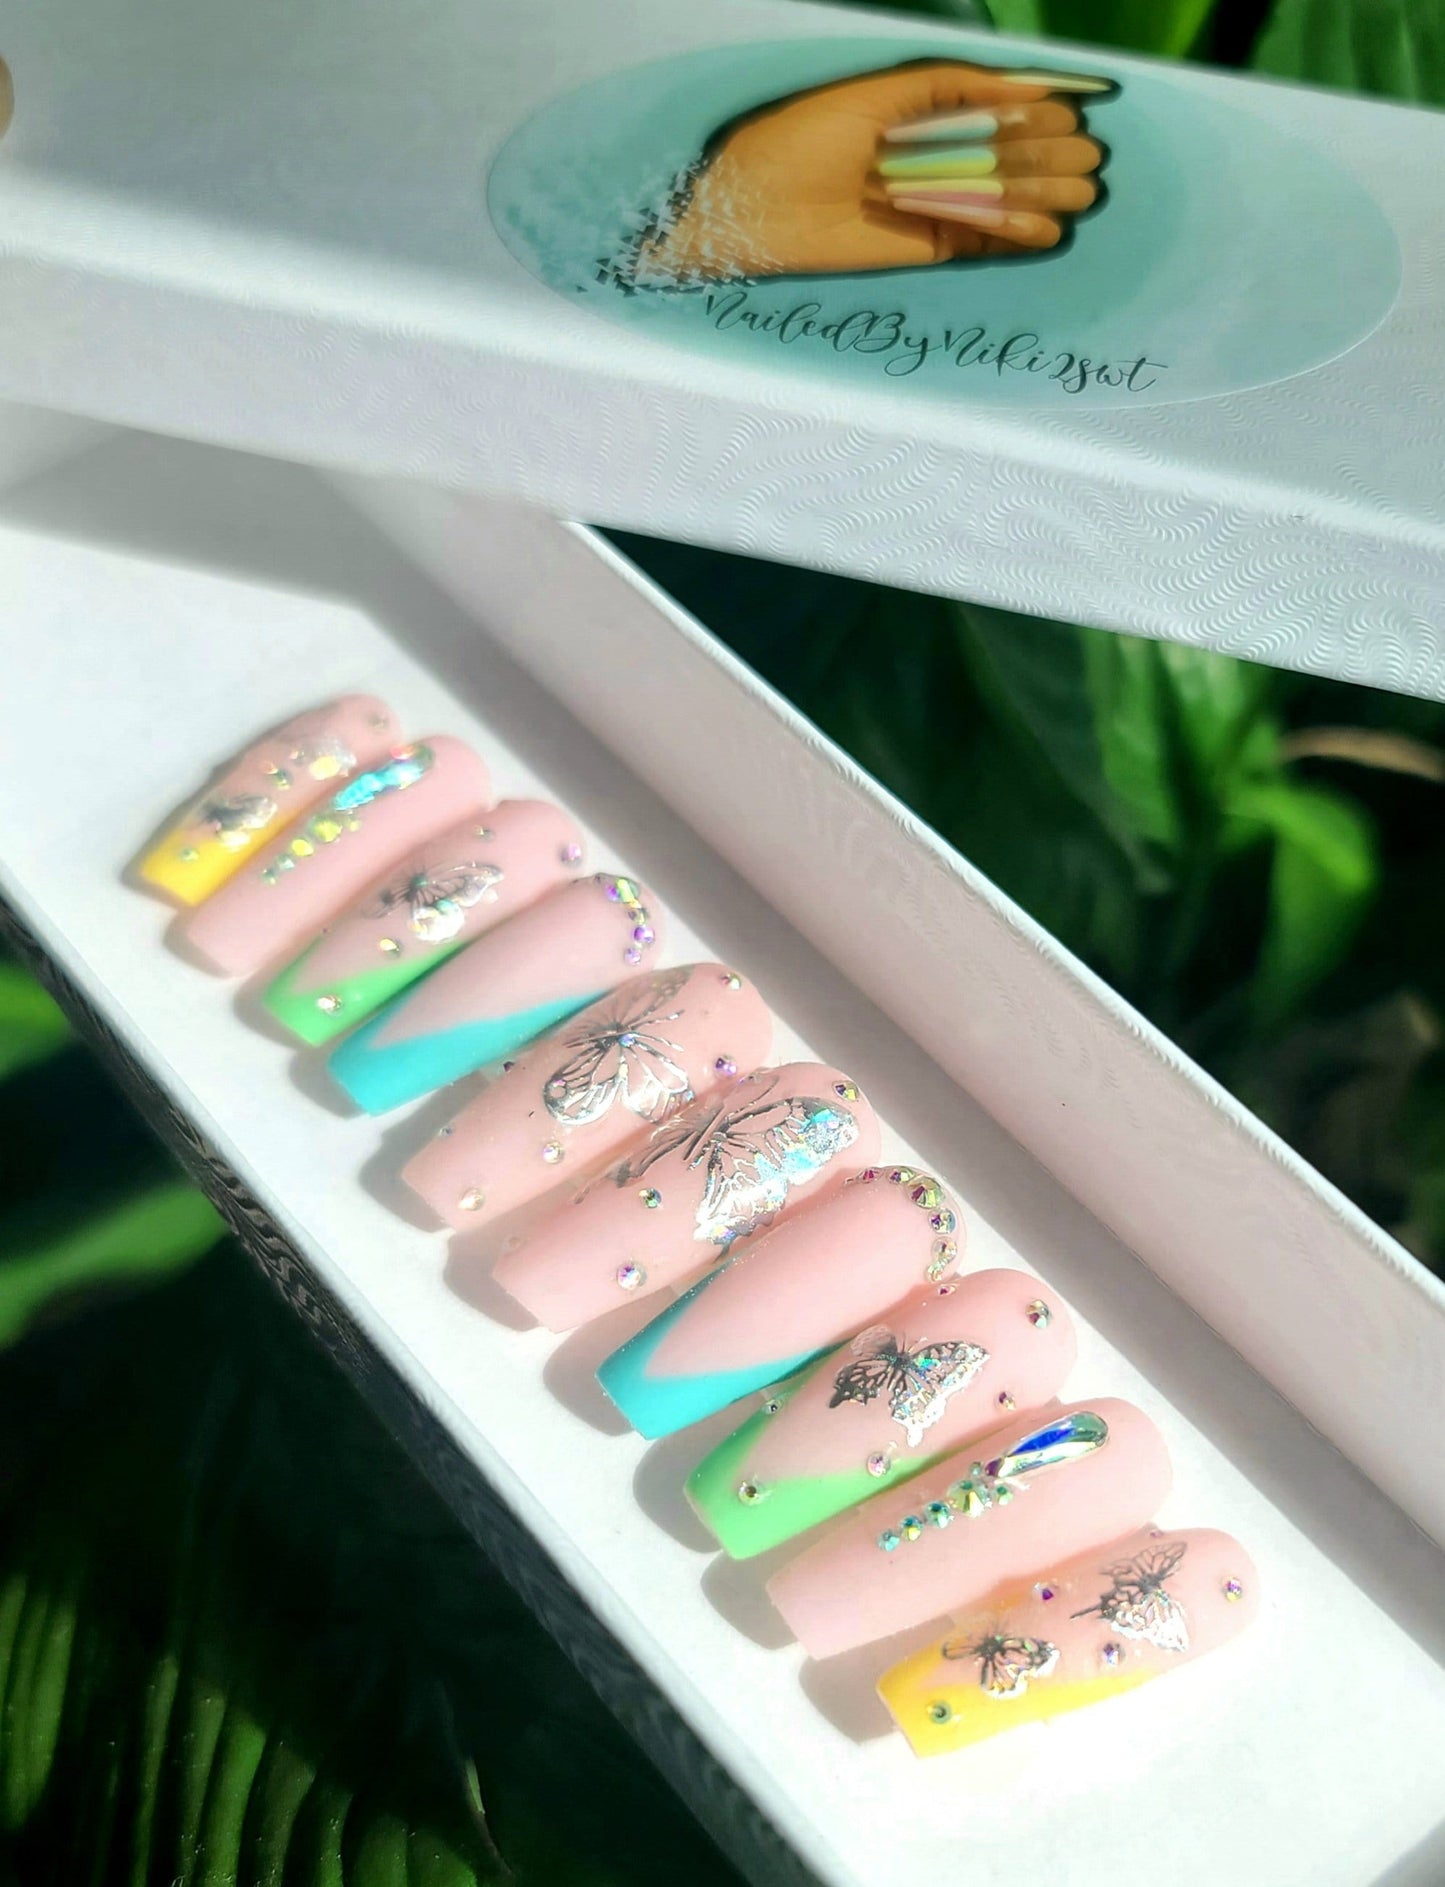 NailedByNiki2swt Holoback Girl Press on Nails Self Care Accessories